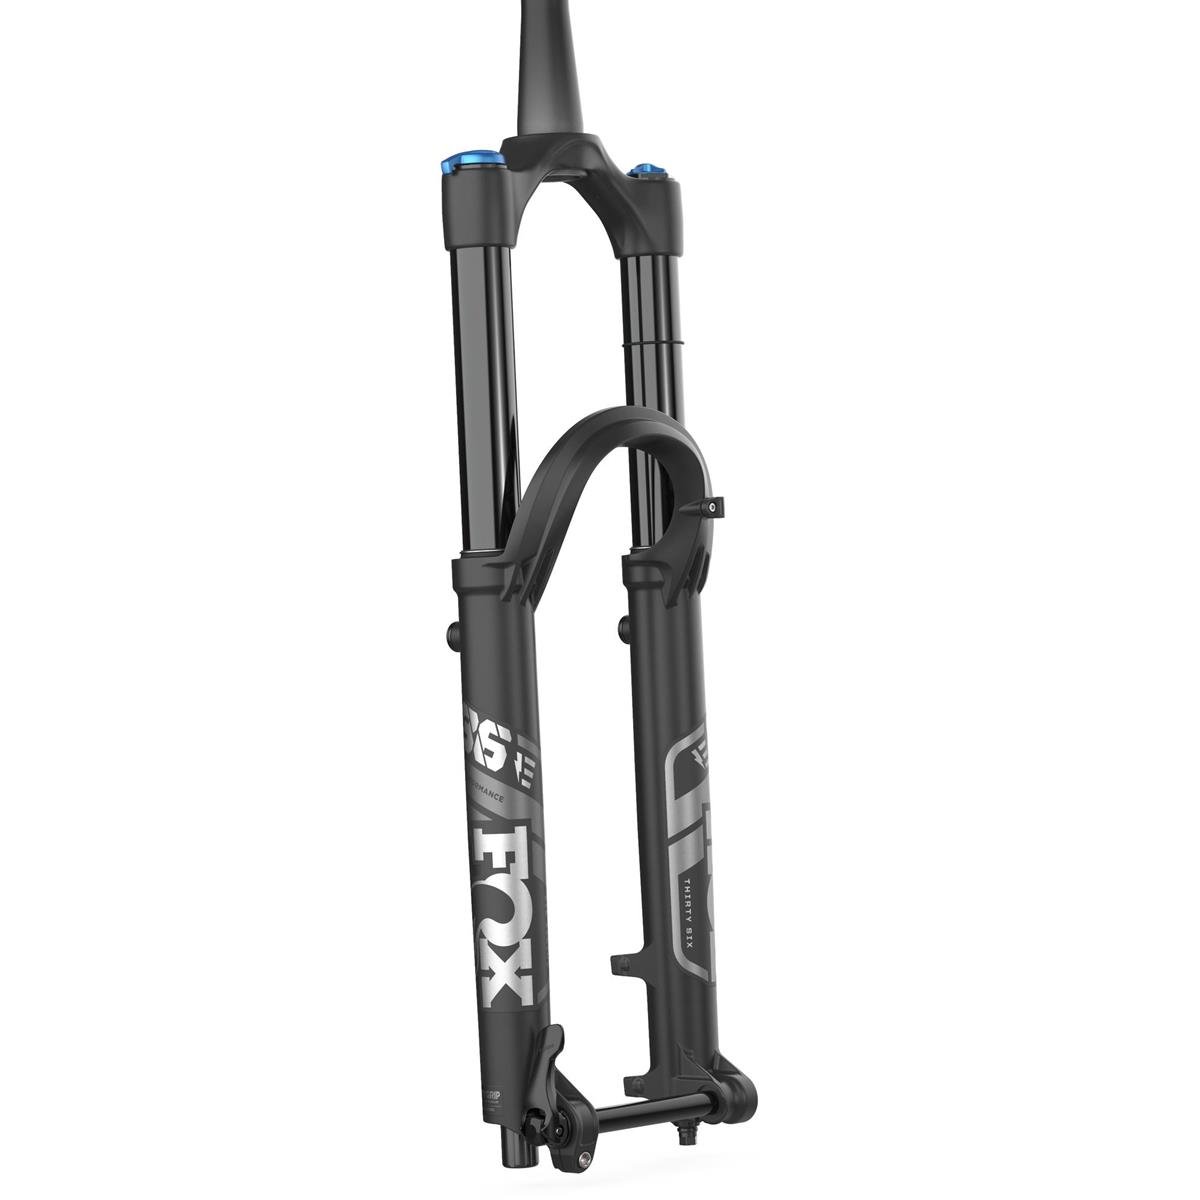 Fox Racing Shox Suspension Fork 36 Float Performance E-Optimized 29 Inches, 15x110 mm, GRIP, 44 mm Offset, 160 mm